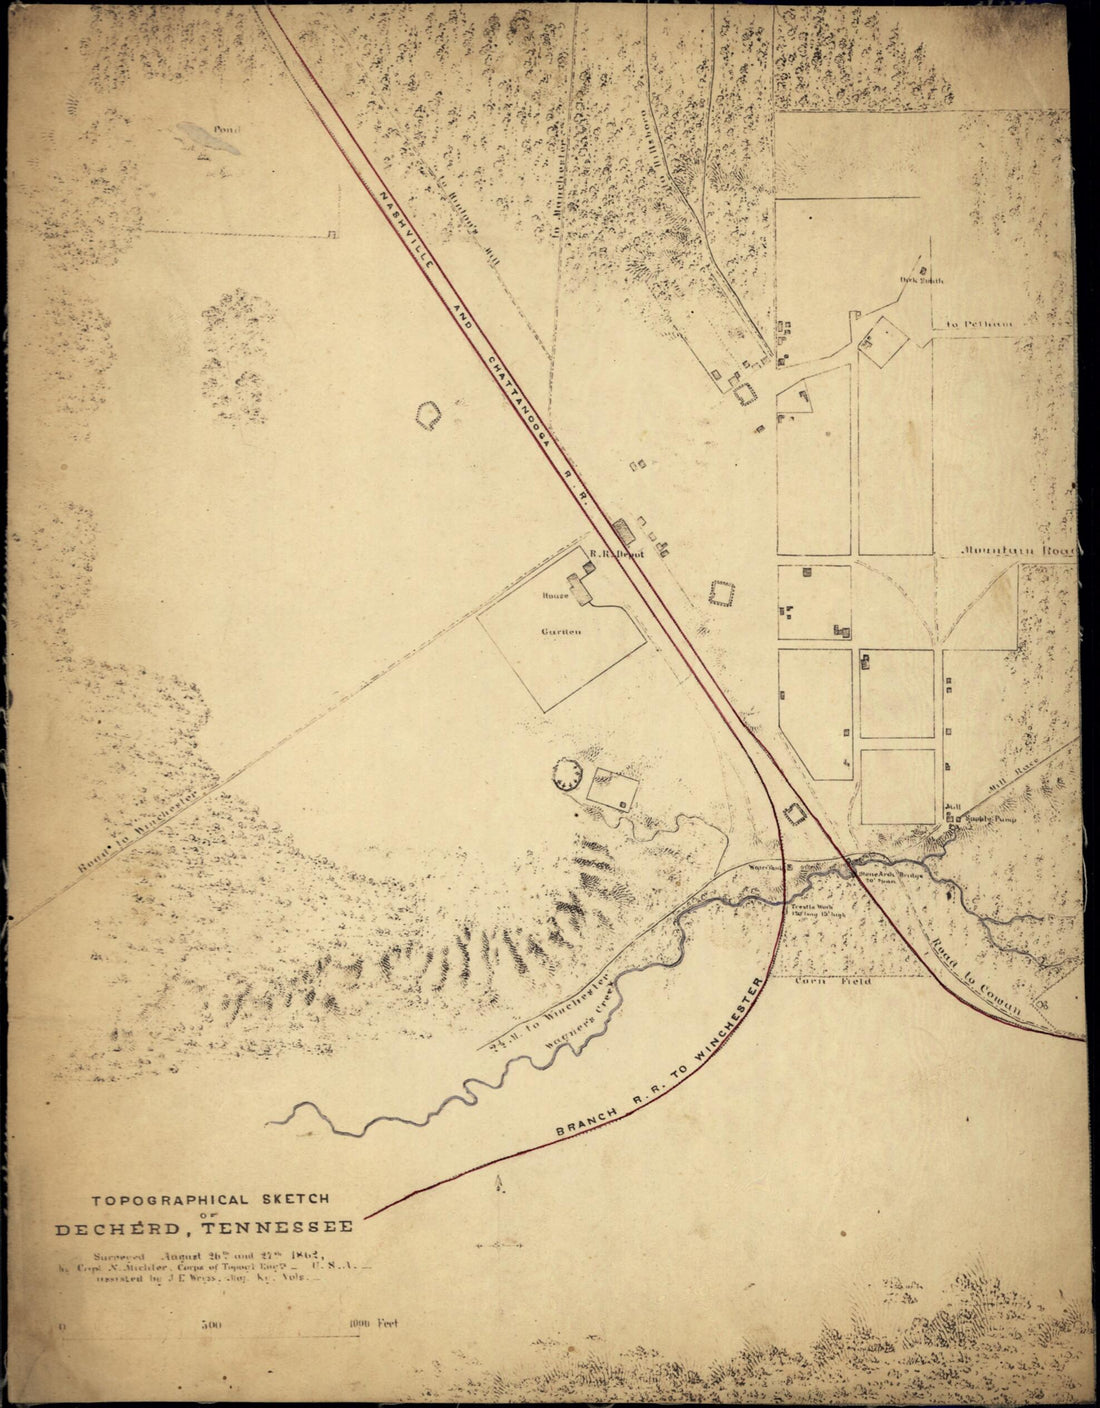 This old map of Topographical Sketch of Decherd, Tennessee from 1862 was created by N. (Nathaniel) Michler, J. E. Weyss in 1862